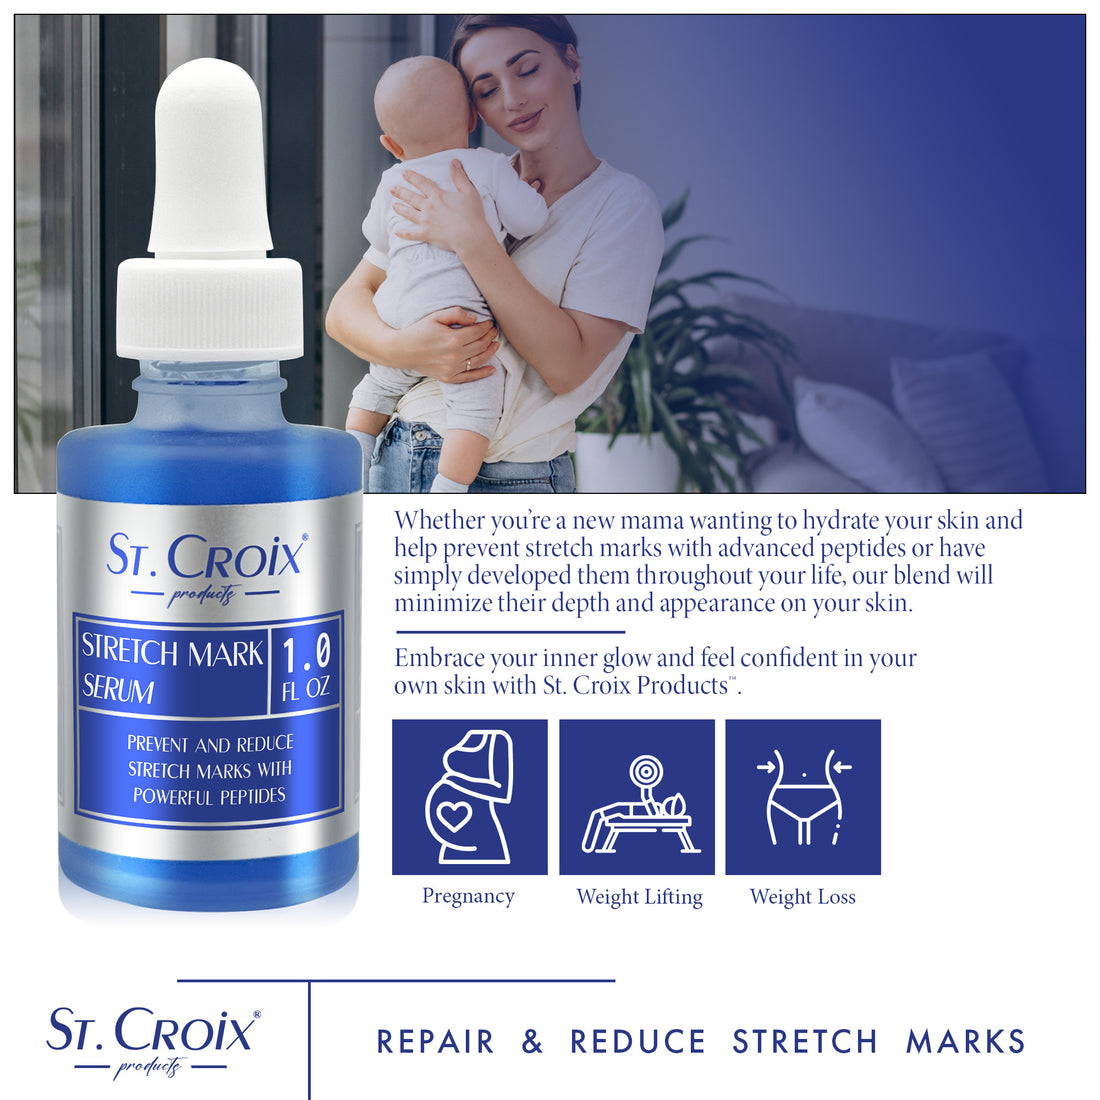 St. Croix Stretch Mark Serum for smoother skin